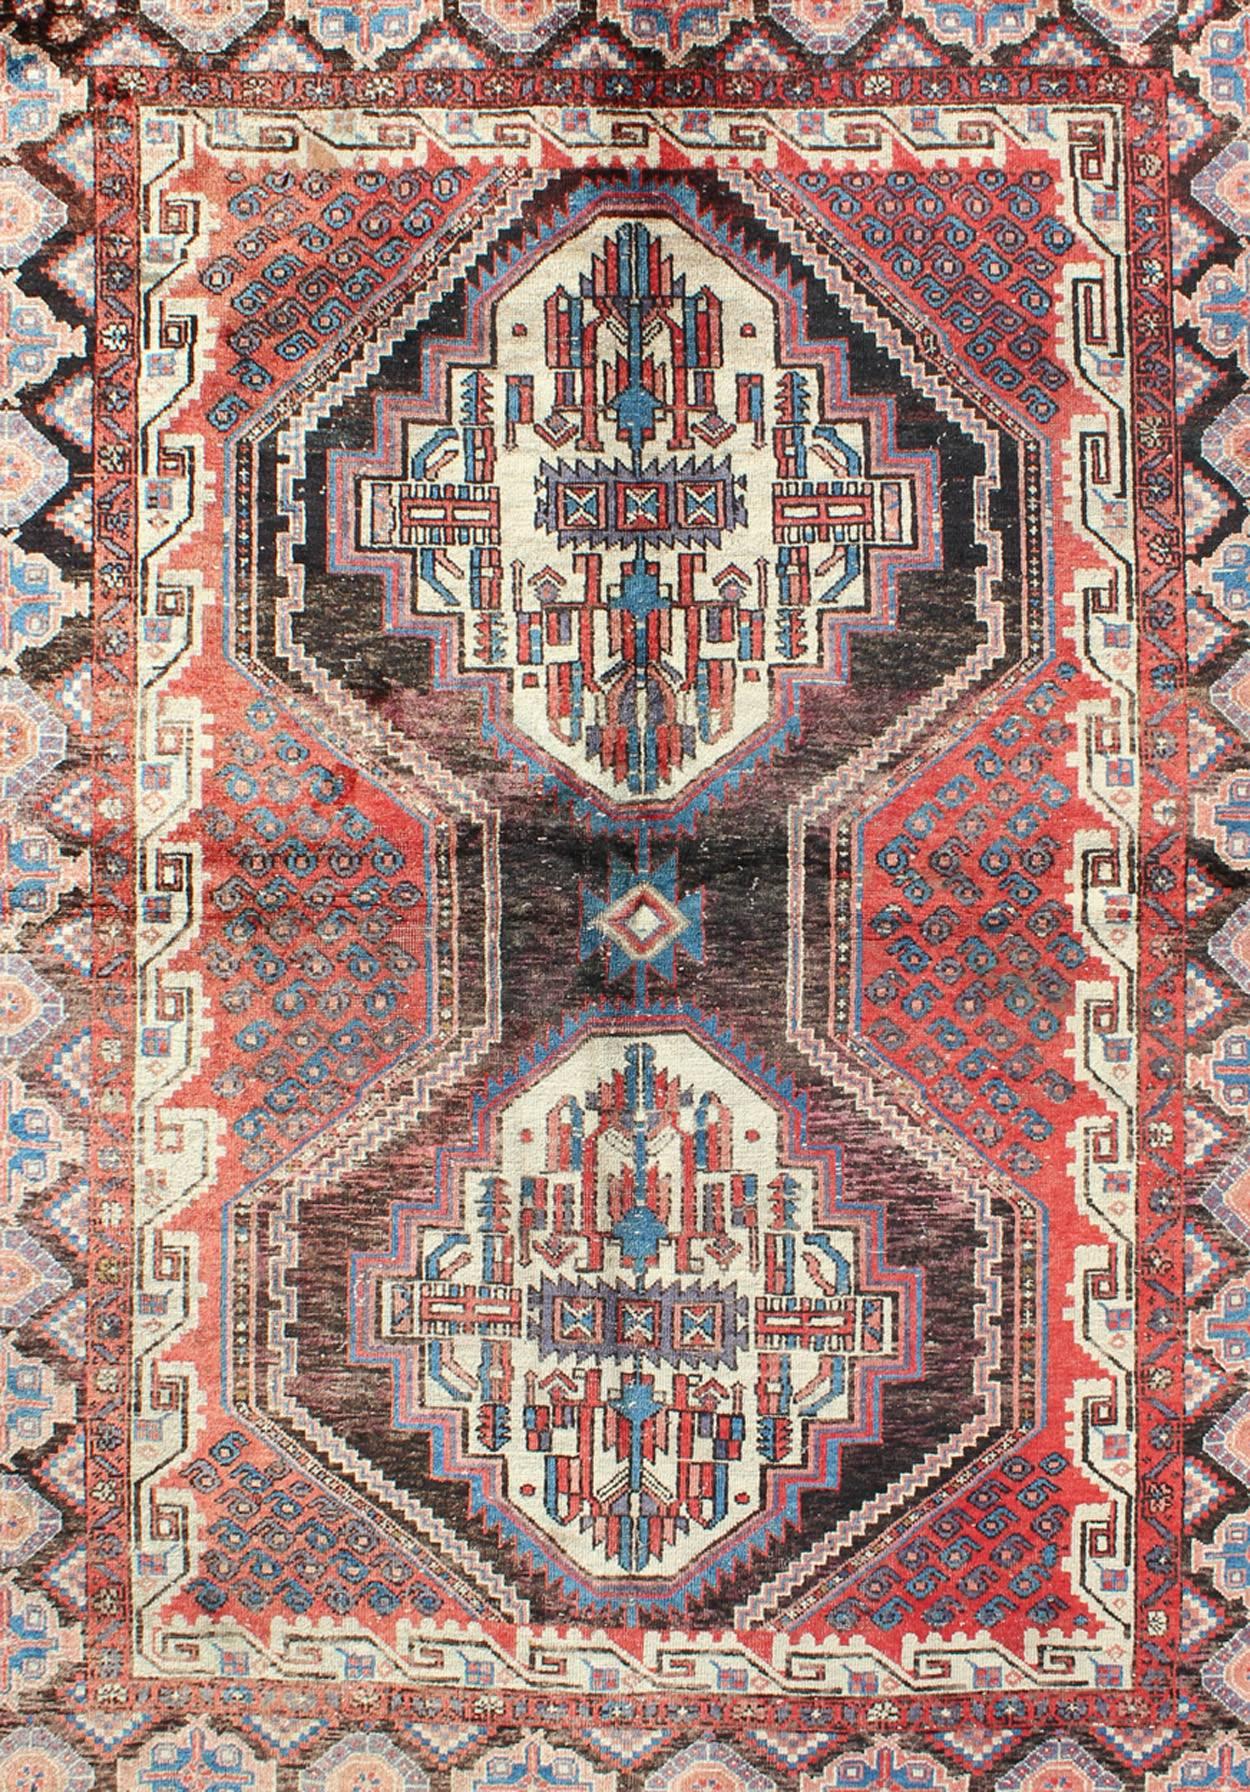 Tribal Dual Medallion Vintage Persian Seejan Rug in Red, Charcoal, Blue, and Brown